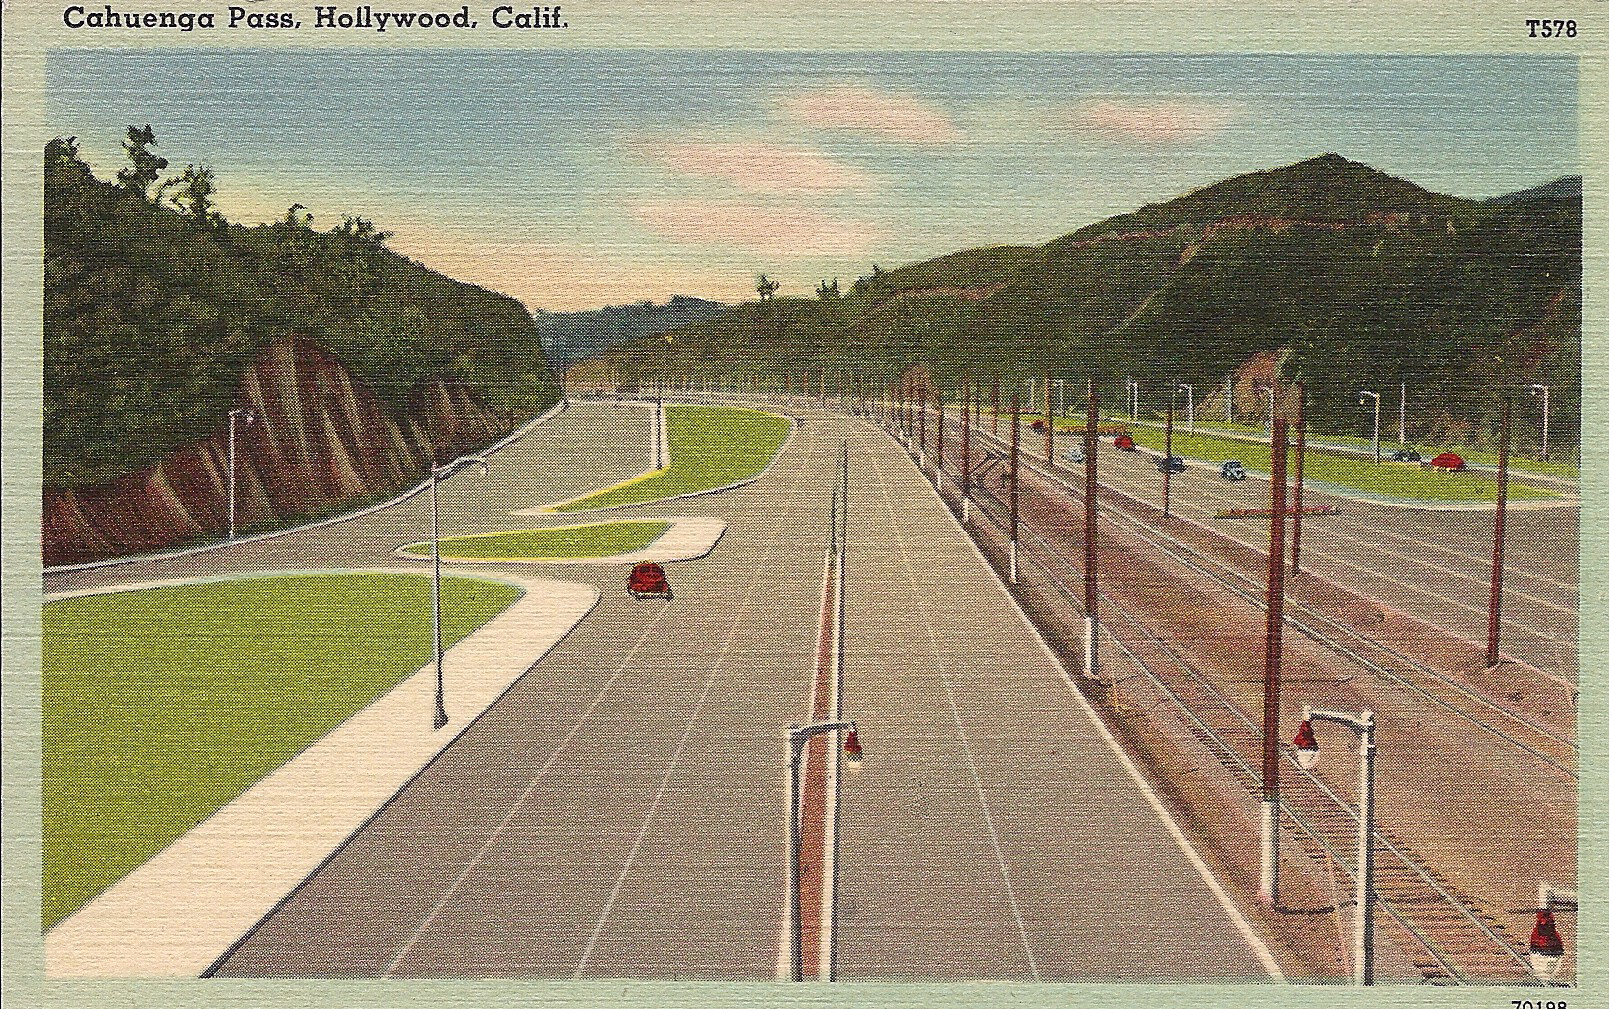 The Cahuenga Pass Parkway in its earliest days